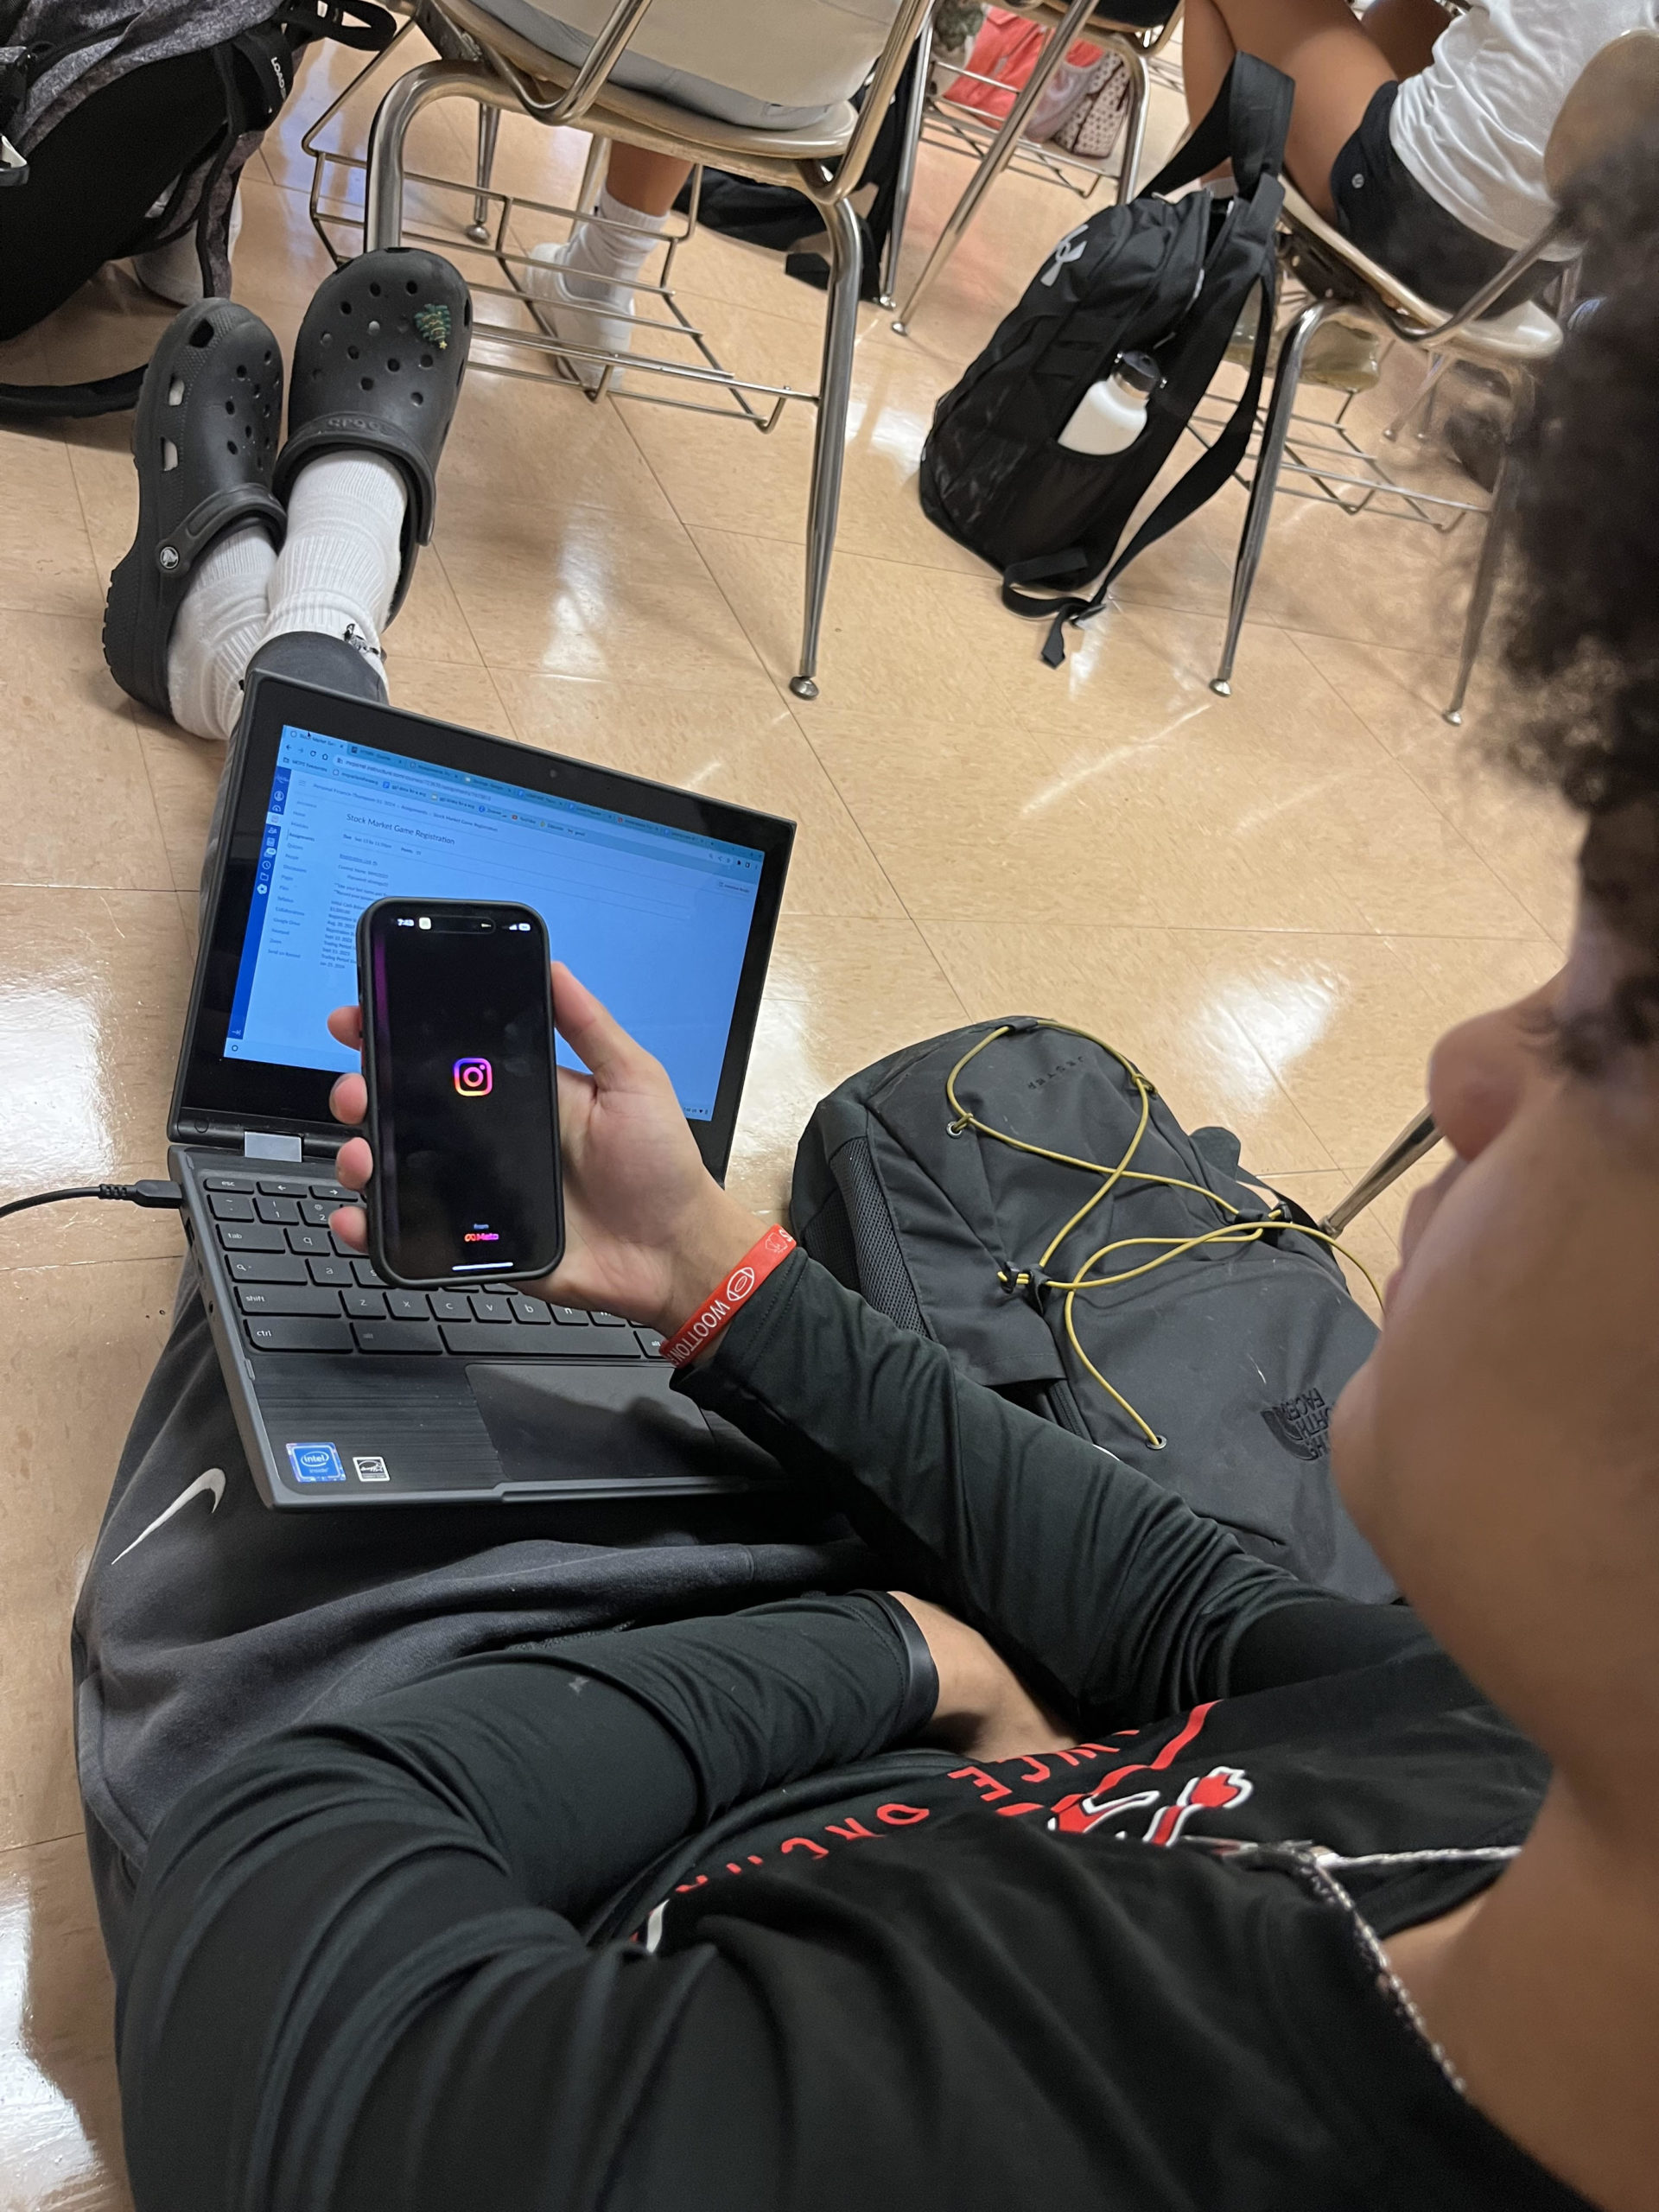 Senior Isaiah Kuiper scrolls on instagram during a flex day in AP Lang. Students often are relaxing or catching up on assignments during flex days, since there is such a heavy workload.